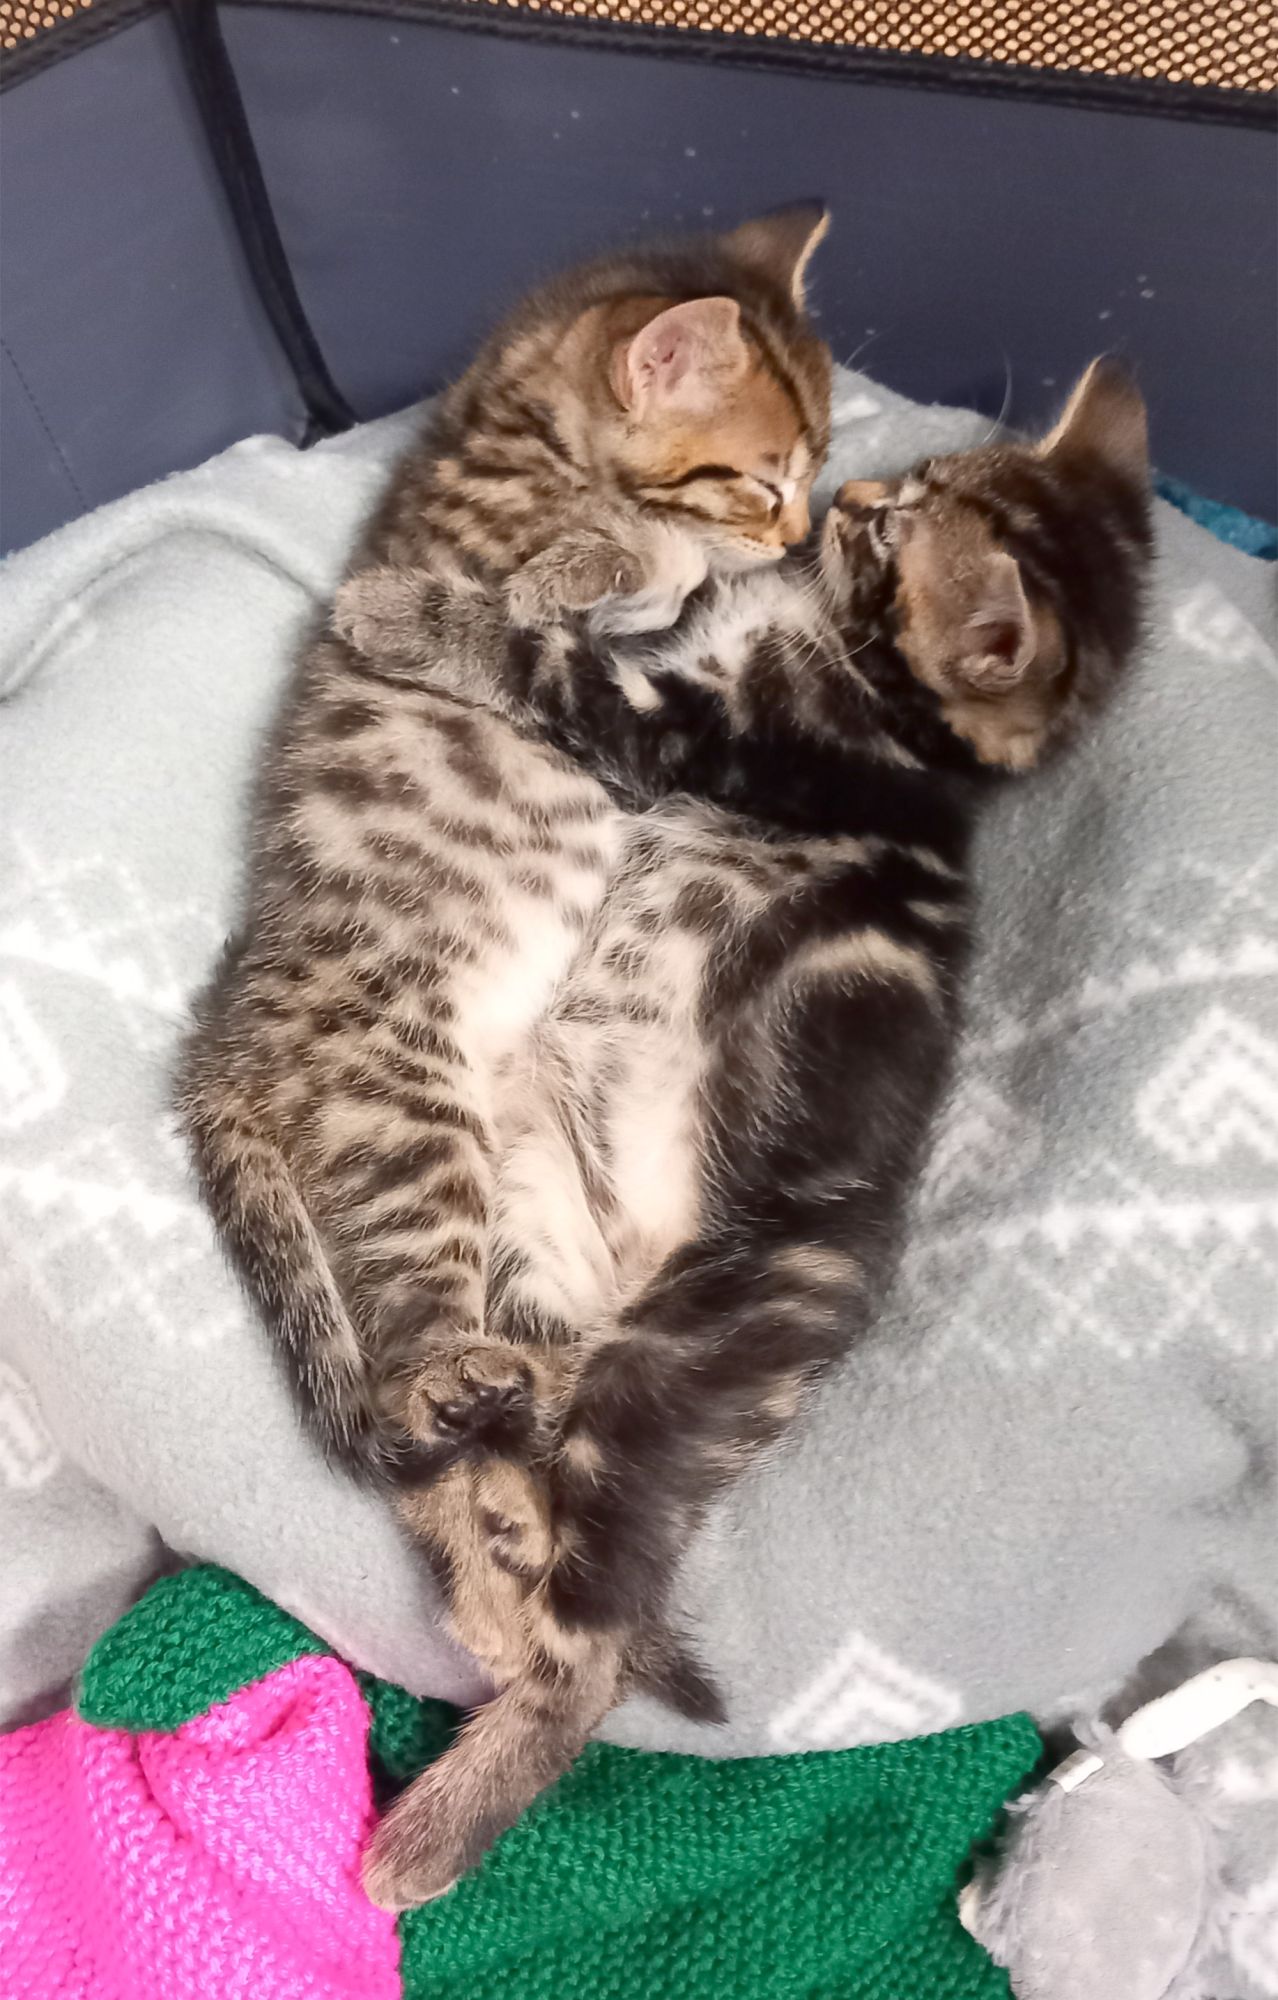 Two kittens in a cuddle